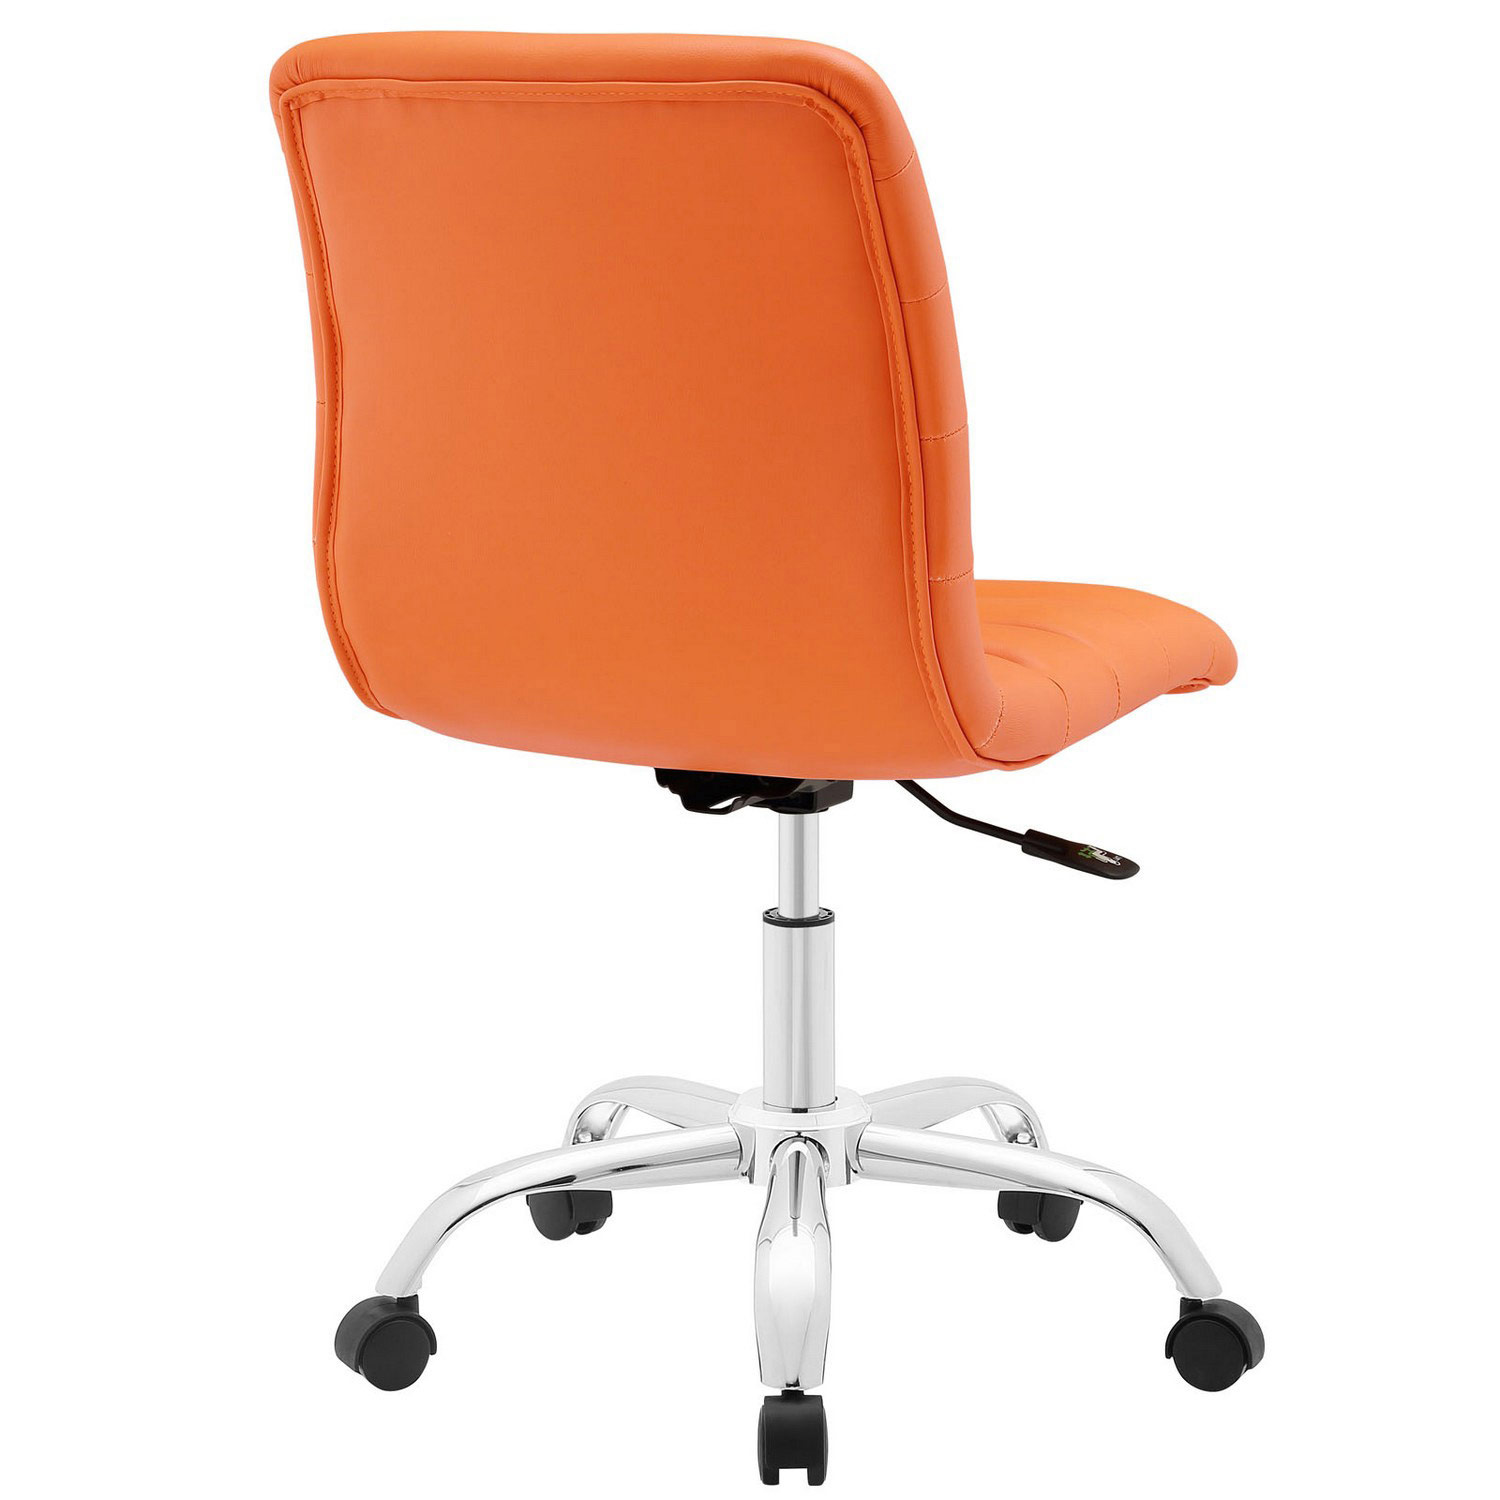 Modway Ripple Armless Mid Back Office Chair - Orange